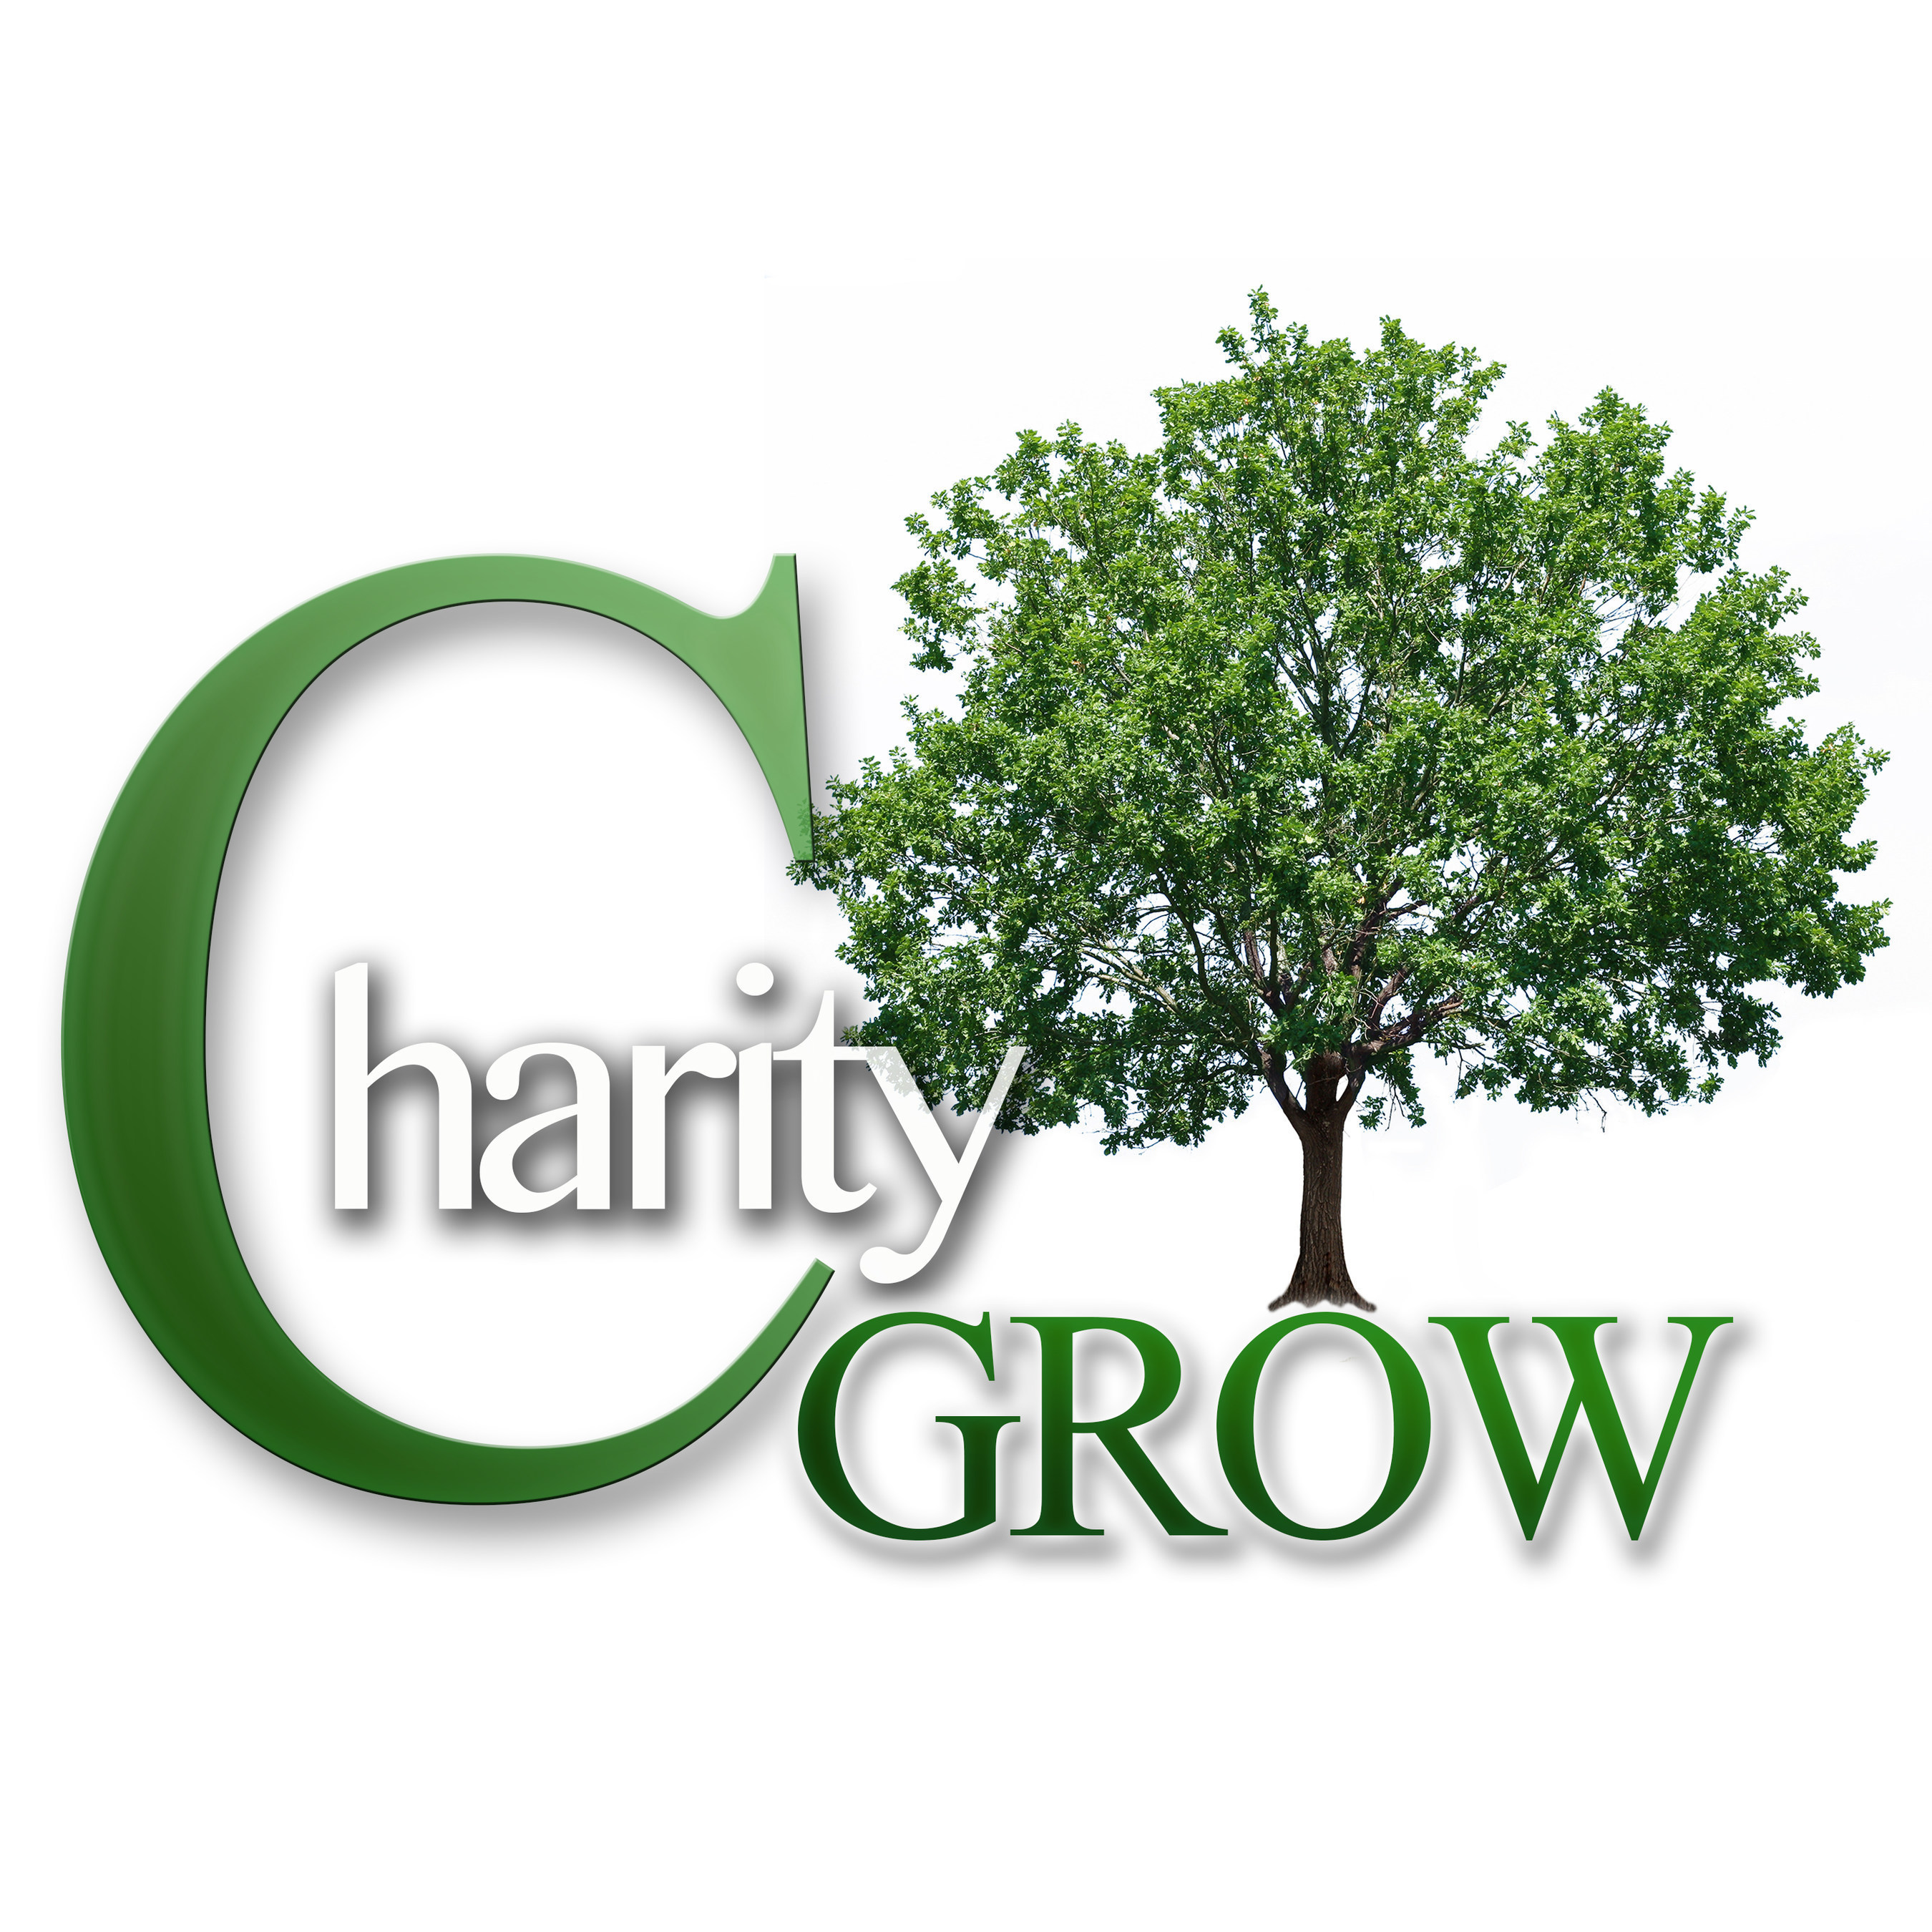 CharityGROW: Your Destination for Charity Auction Items and Fundraising Ideas